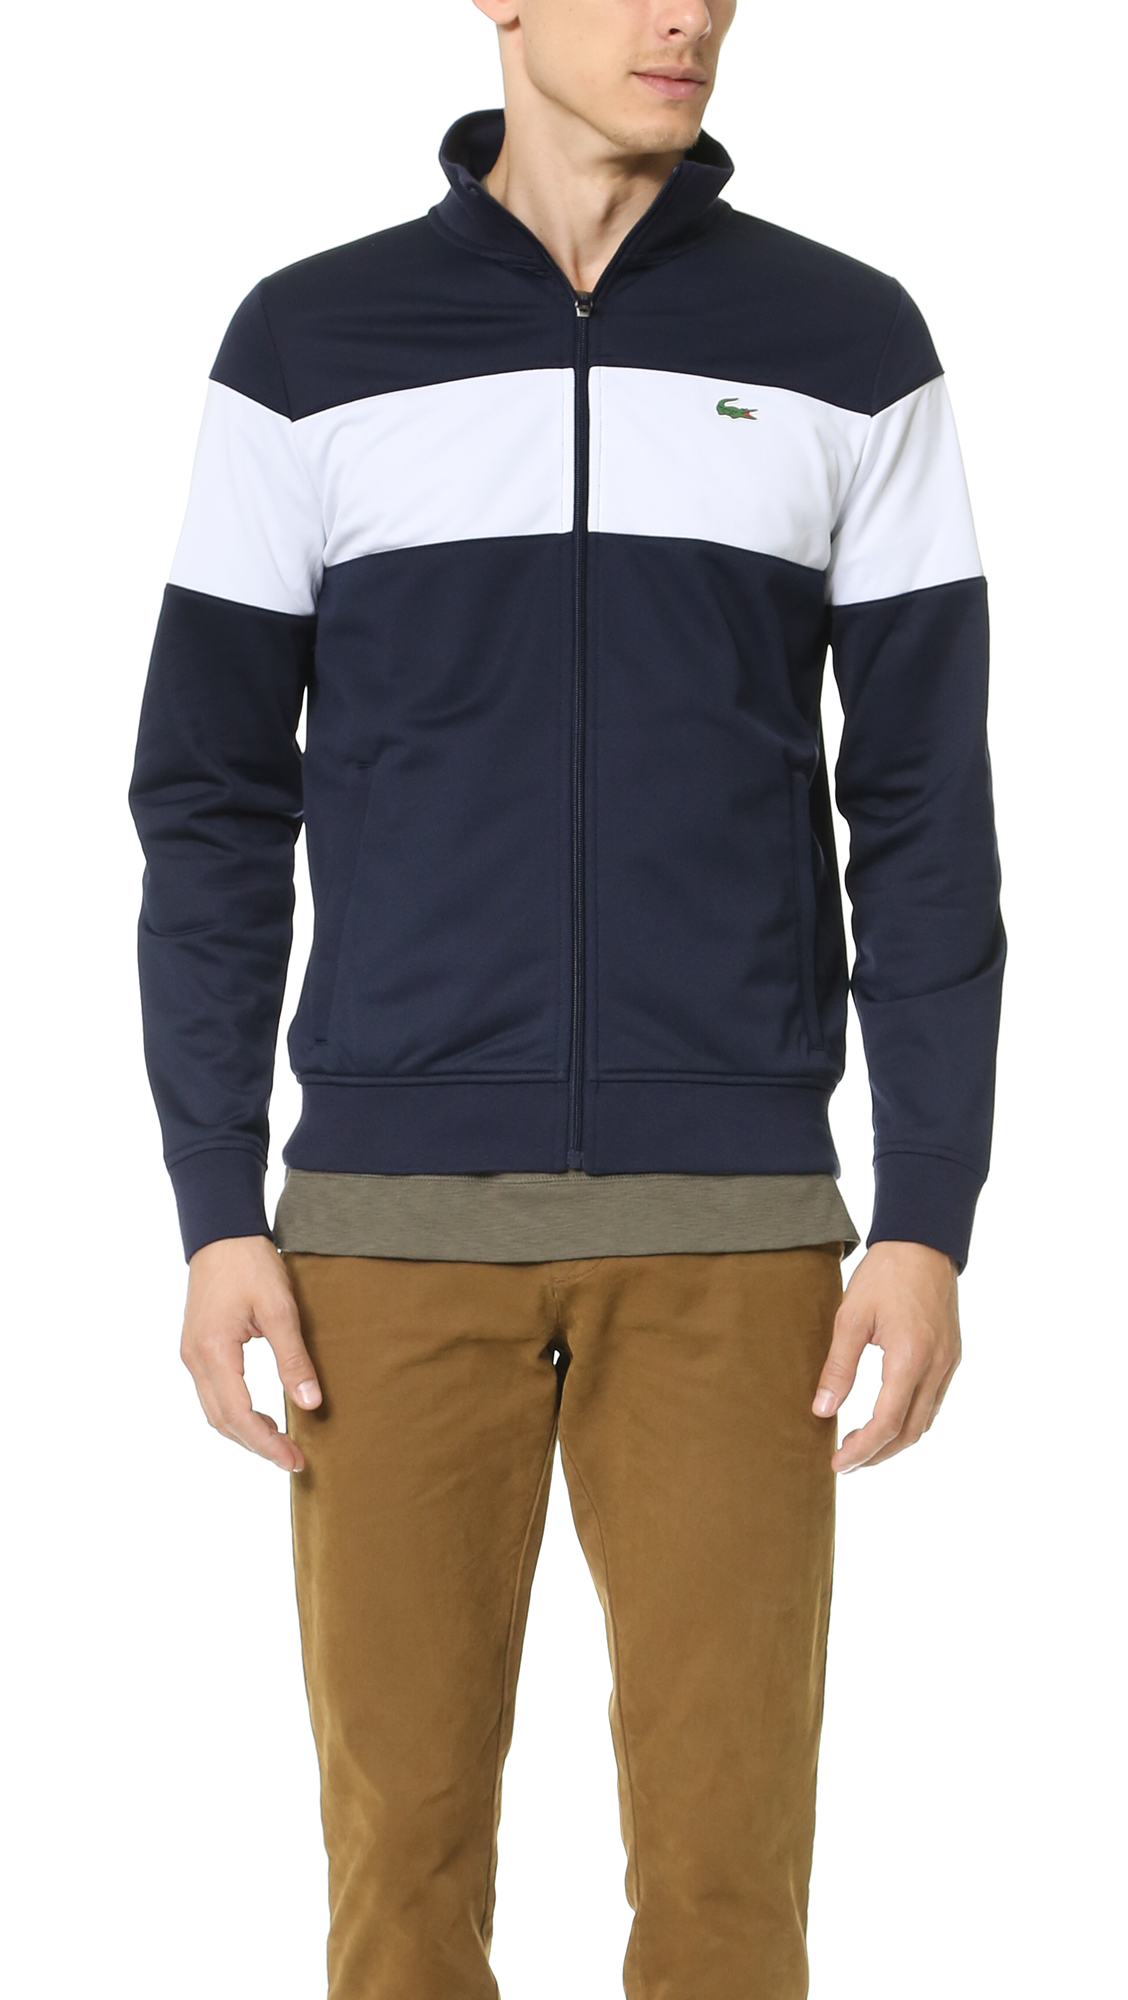 lacoste jacket blue and white